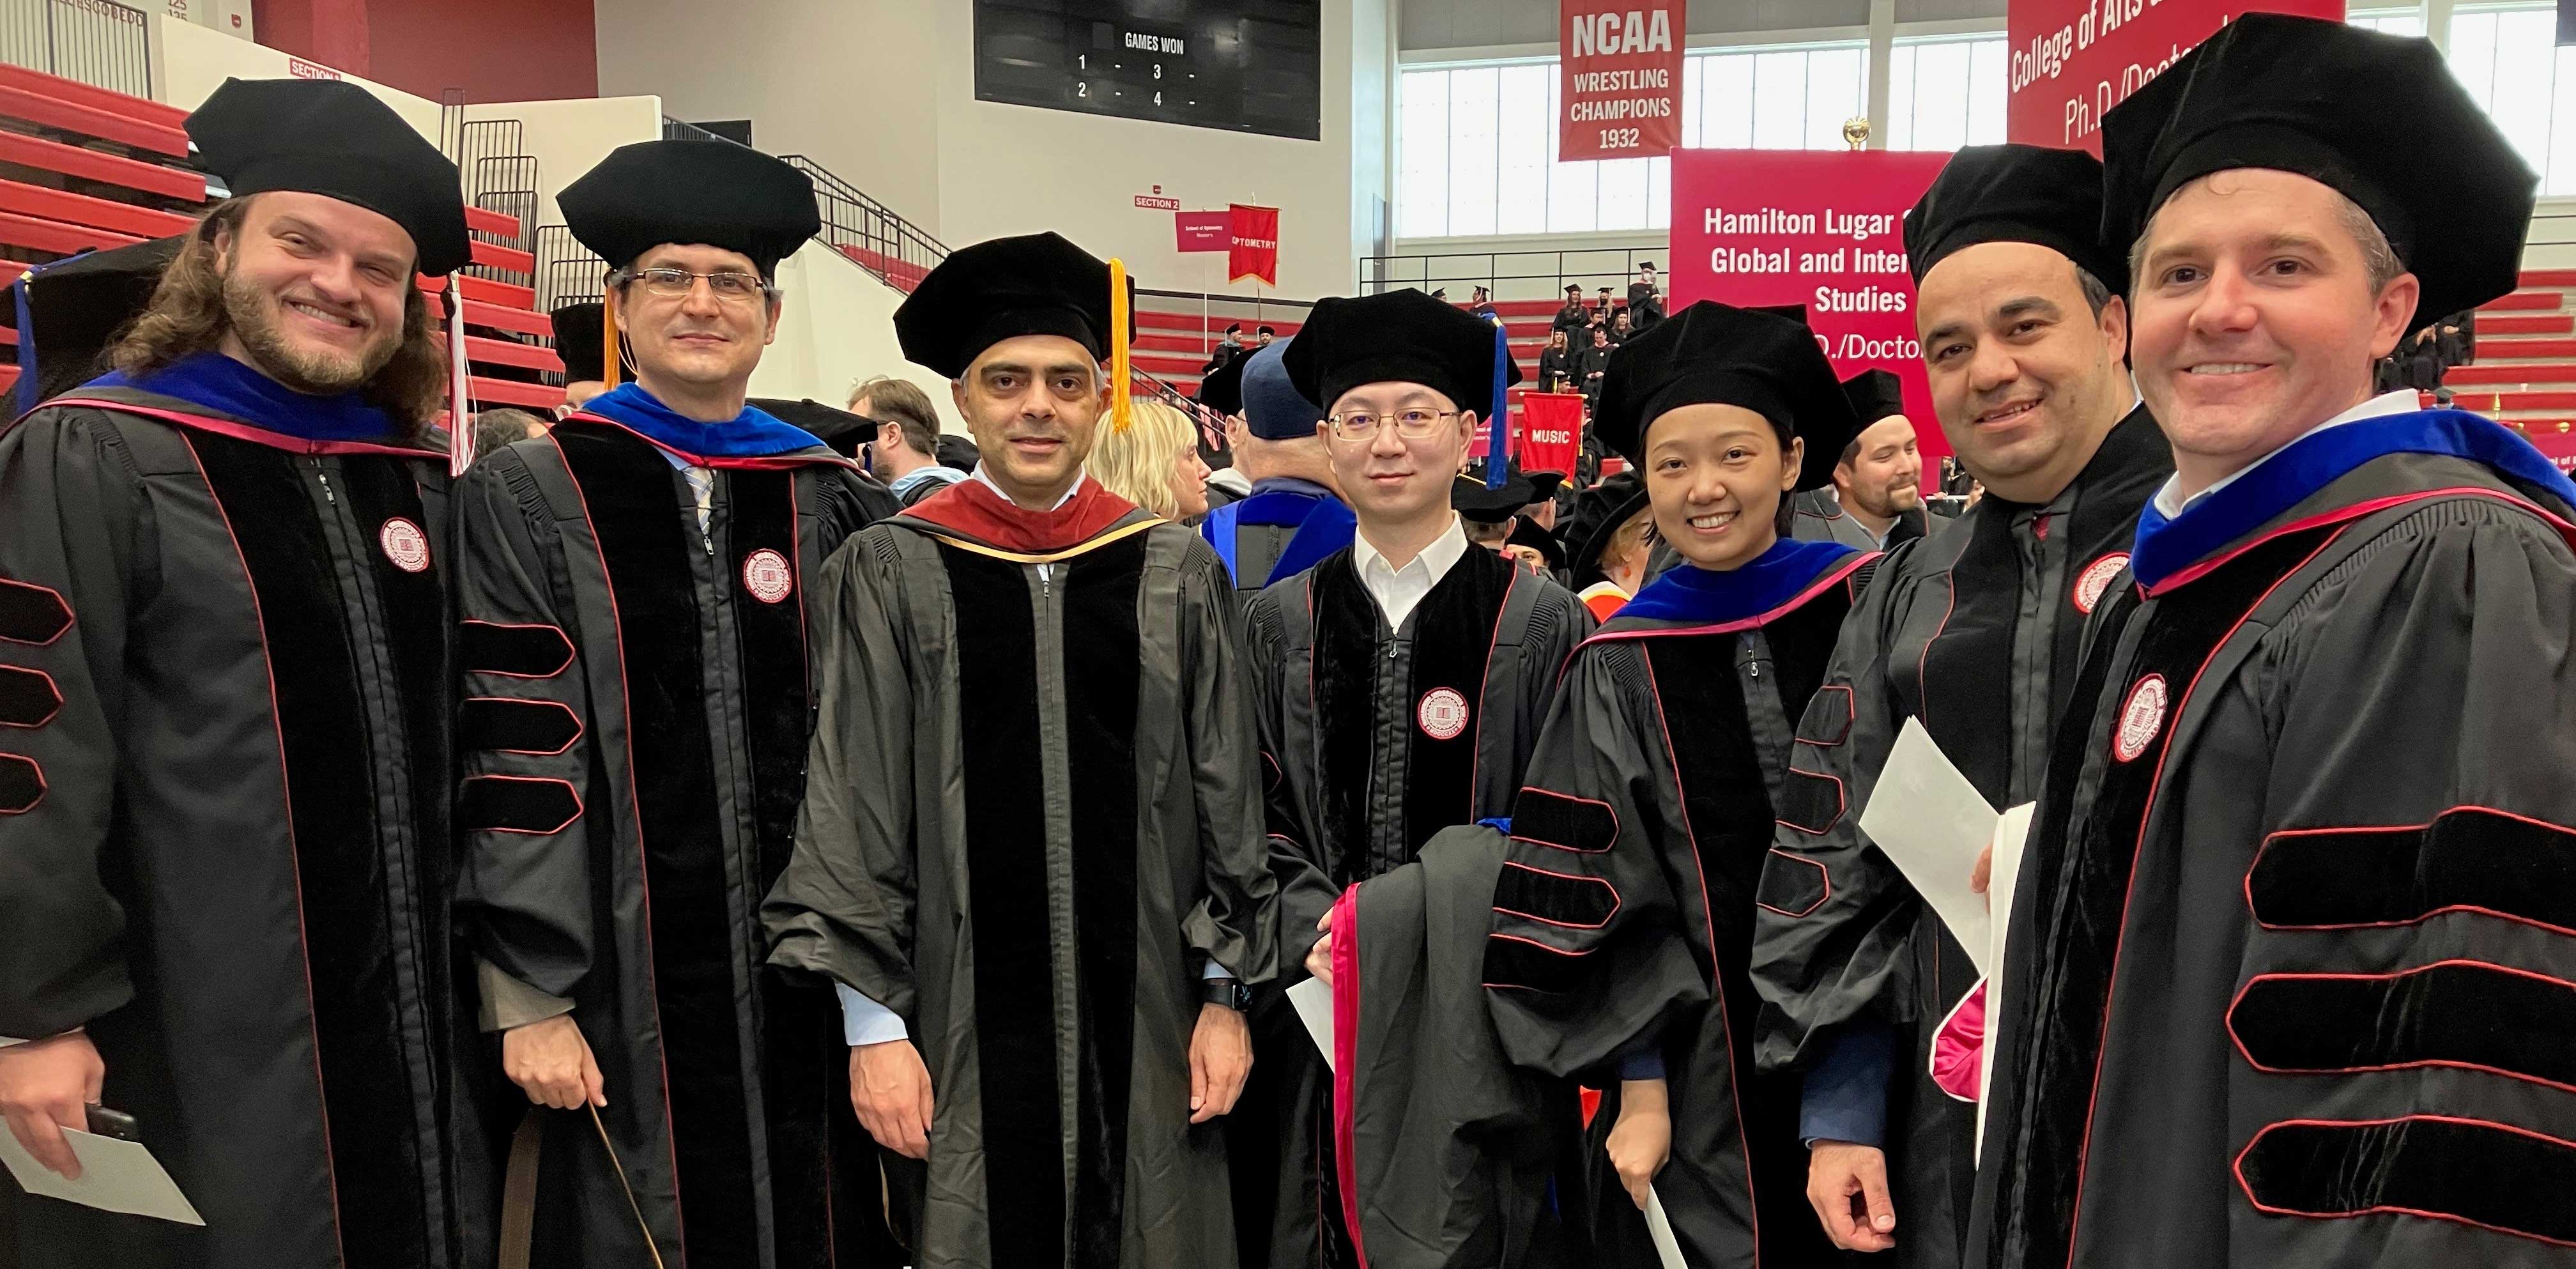 A group of people pose in Assembly Hall, dressed in doctoral caps and gowns.